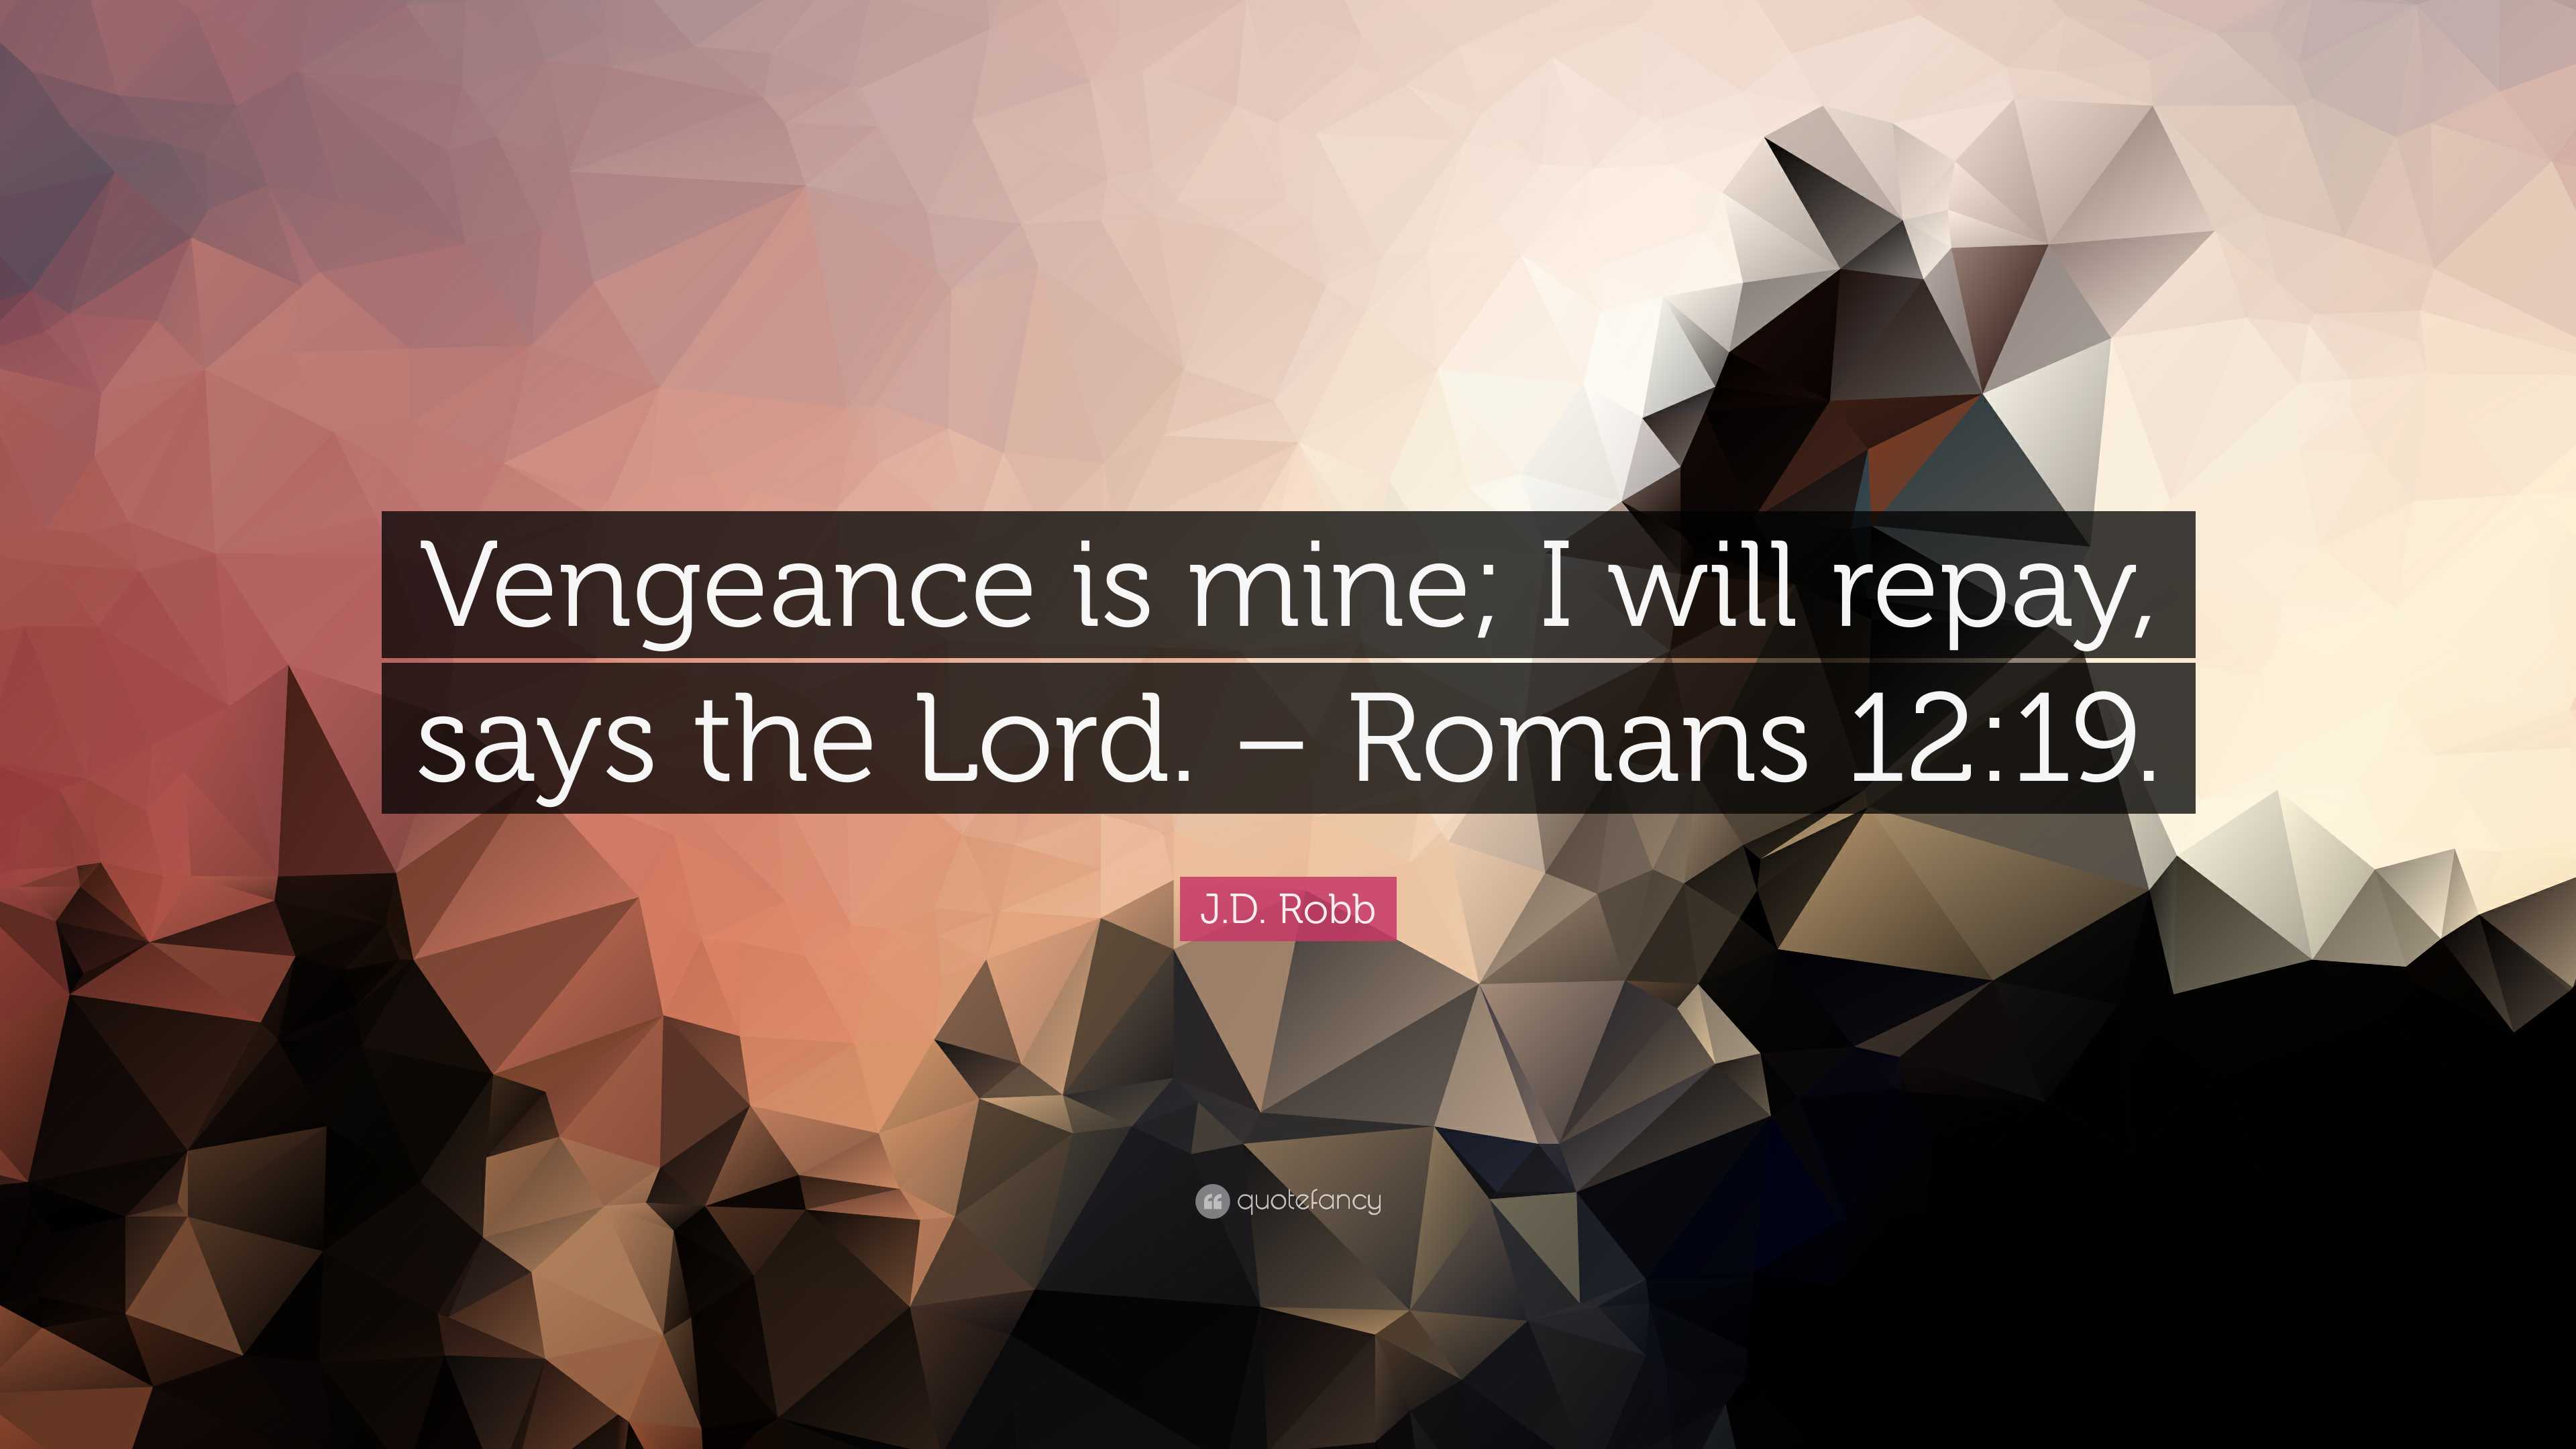 Vengeance is Mine' Says the Lord - Meaning of Romans 12:19